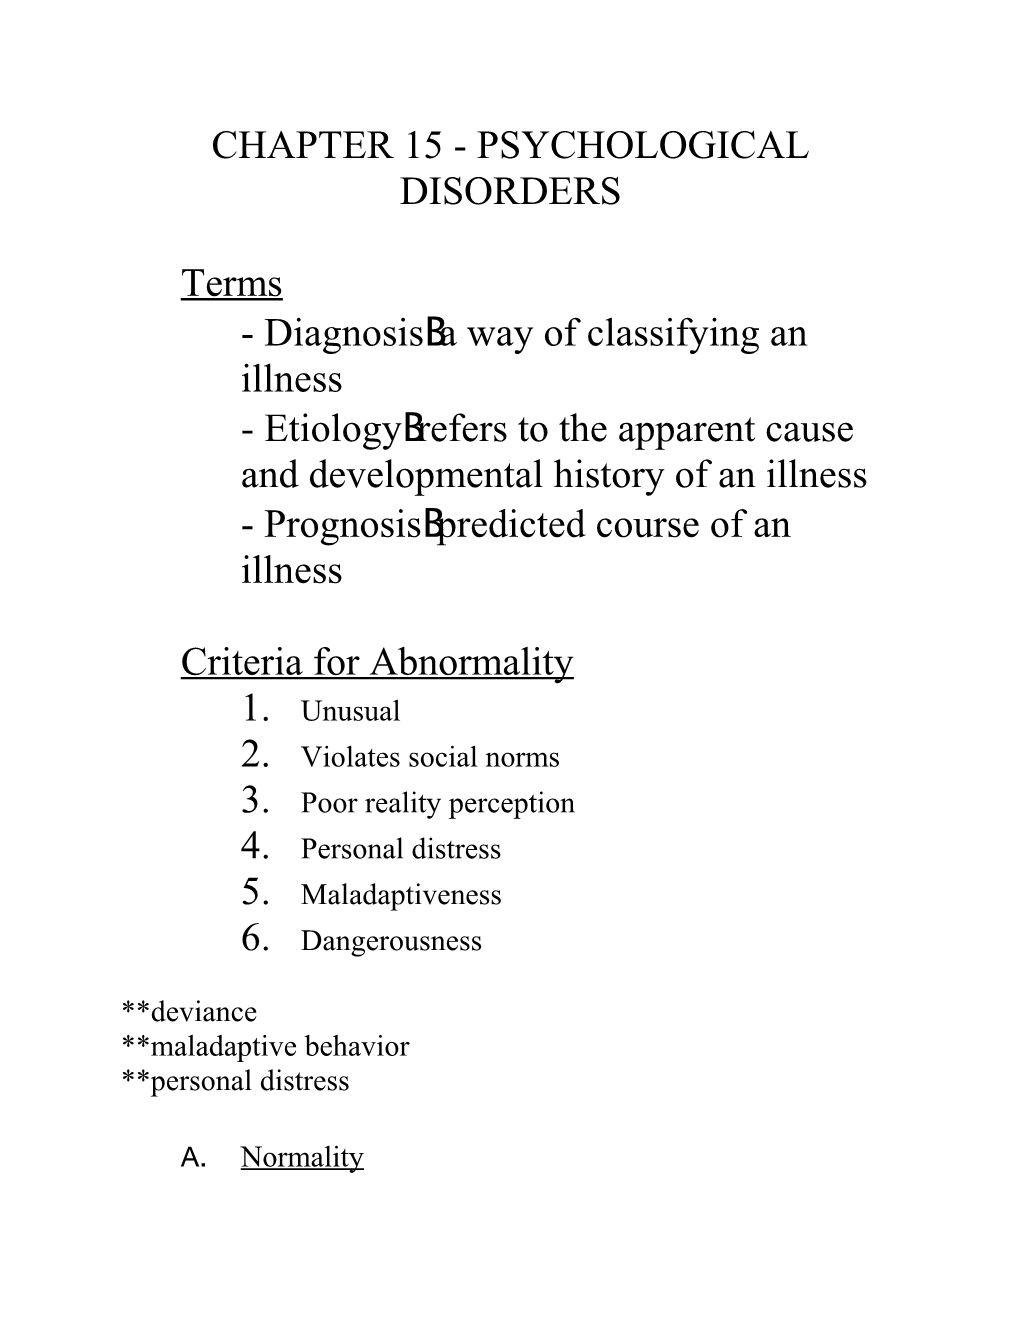 Chapter 15 - Psychological Disorders